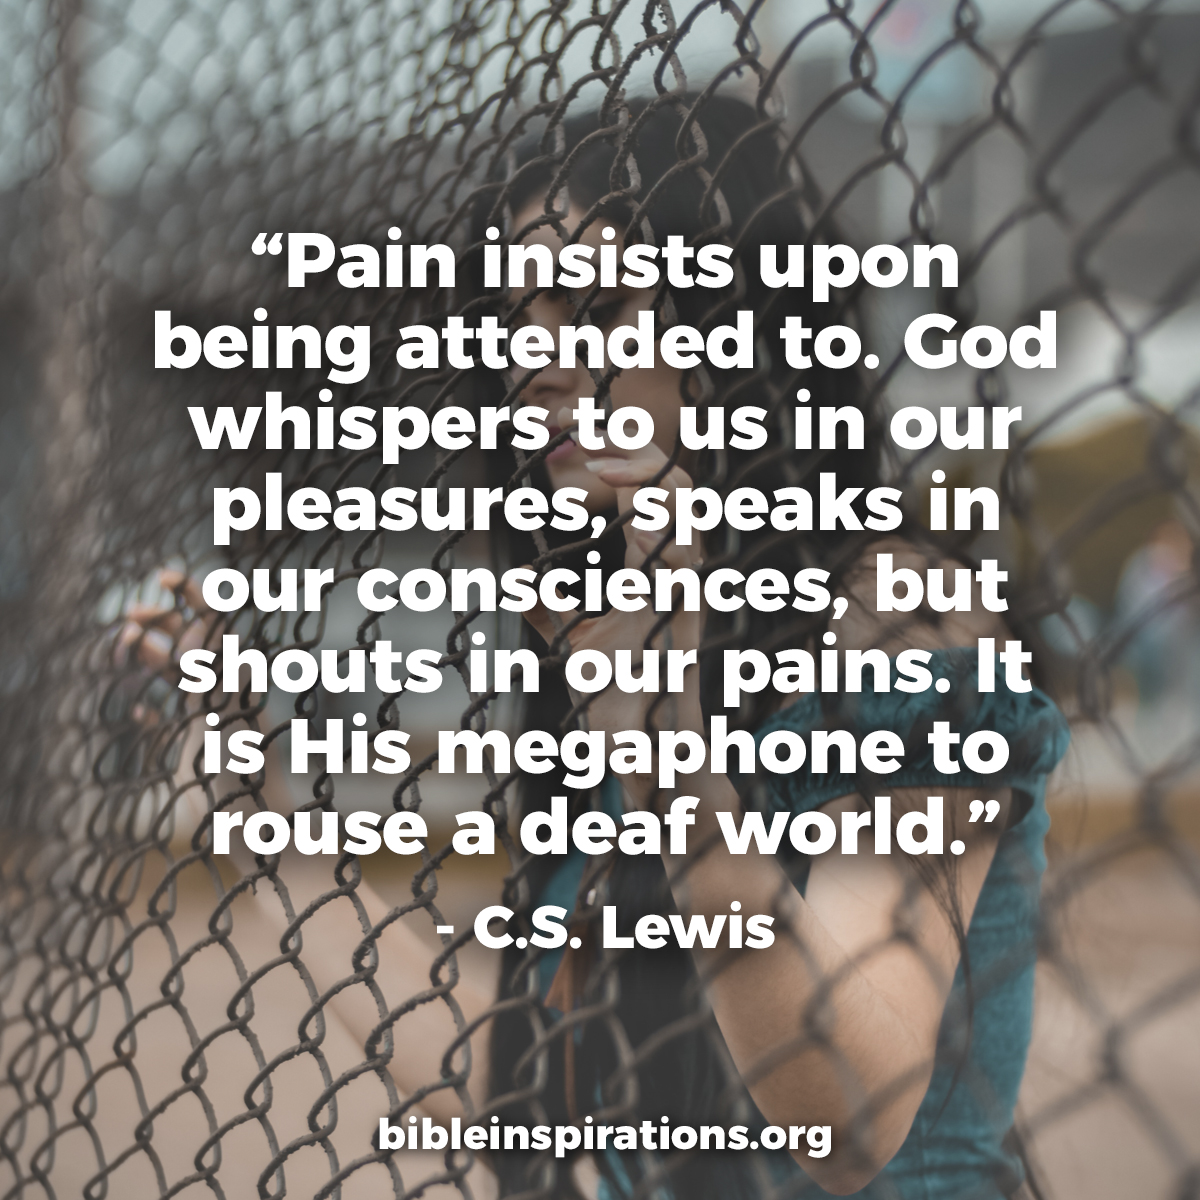 Pain insists upon being attended to. God whispers to us in our pleasures, speaks in our consciences, but shouts in our pains. It is His megaphone to rouse a deaf world. - C.S. Lewis